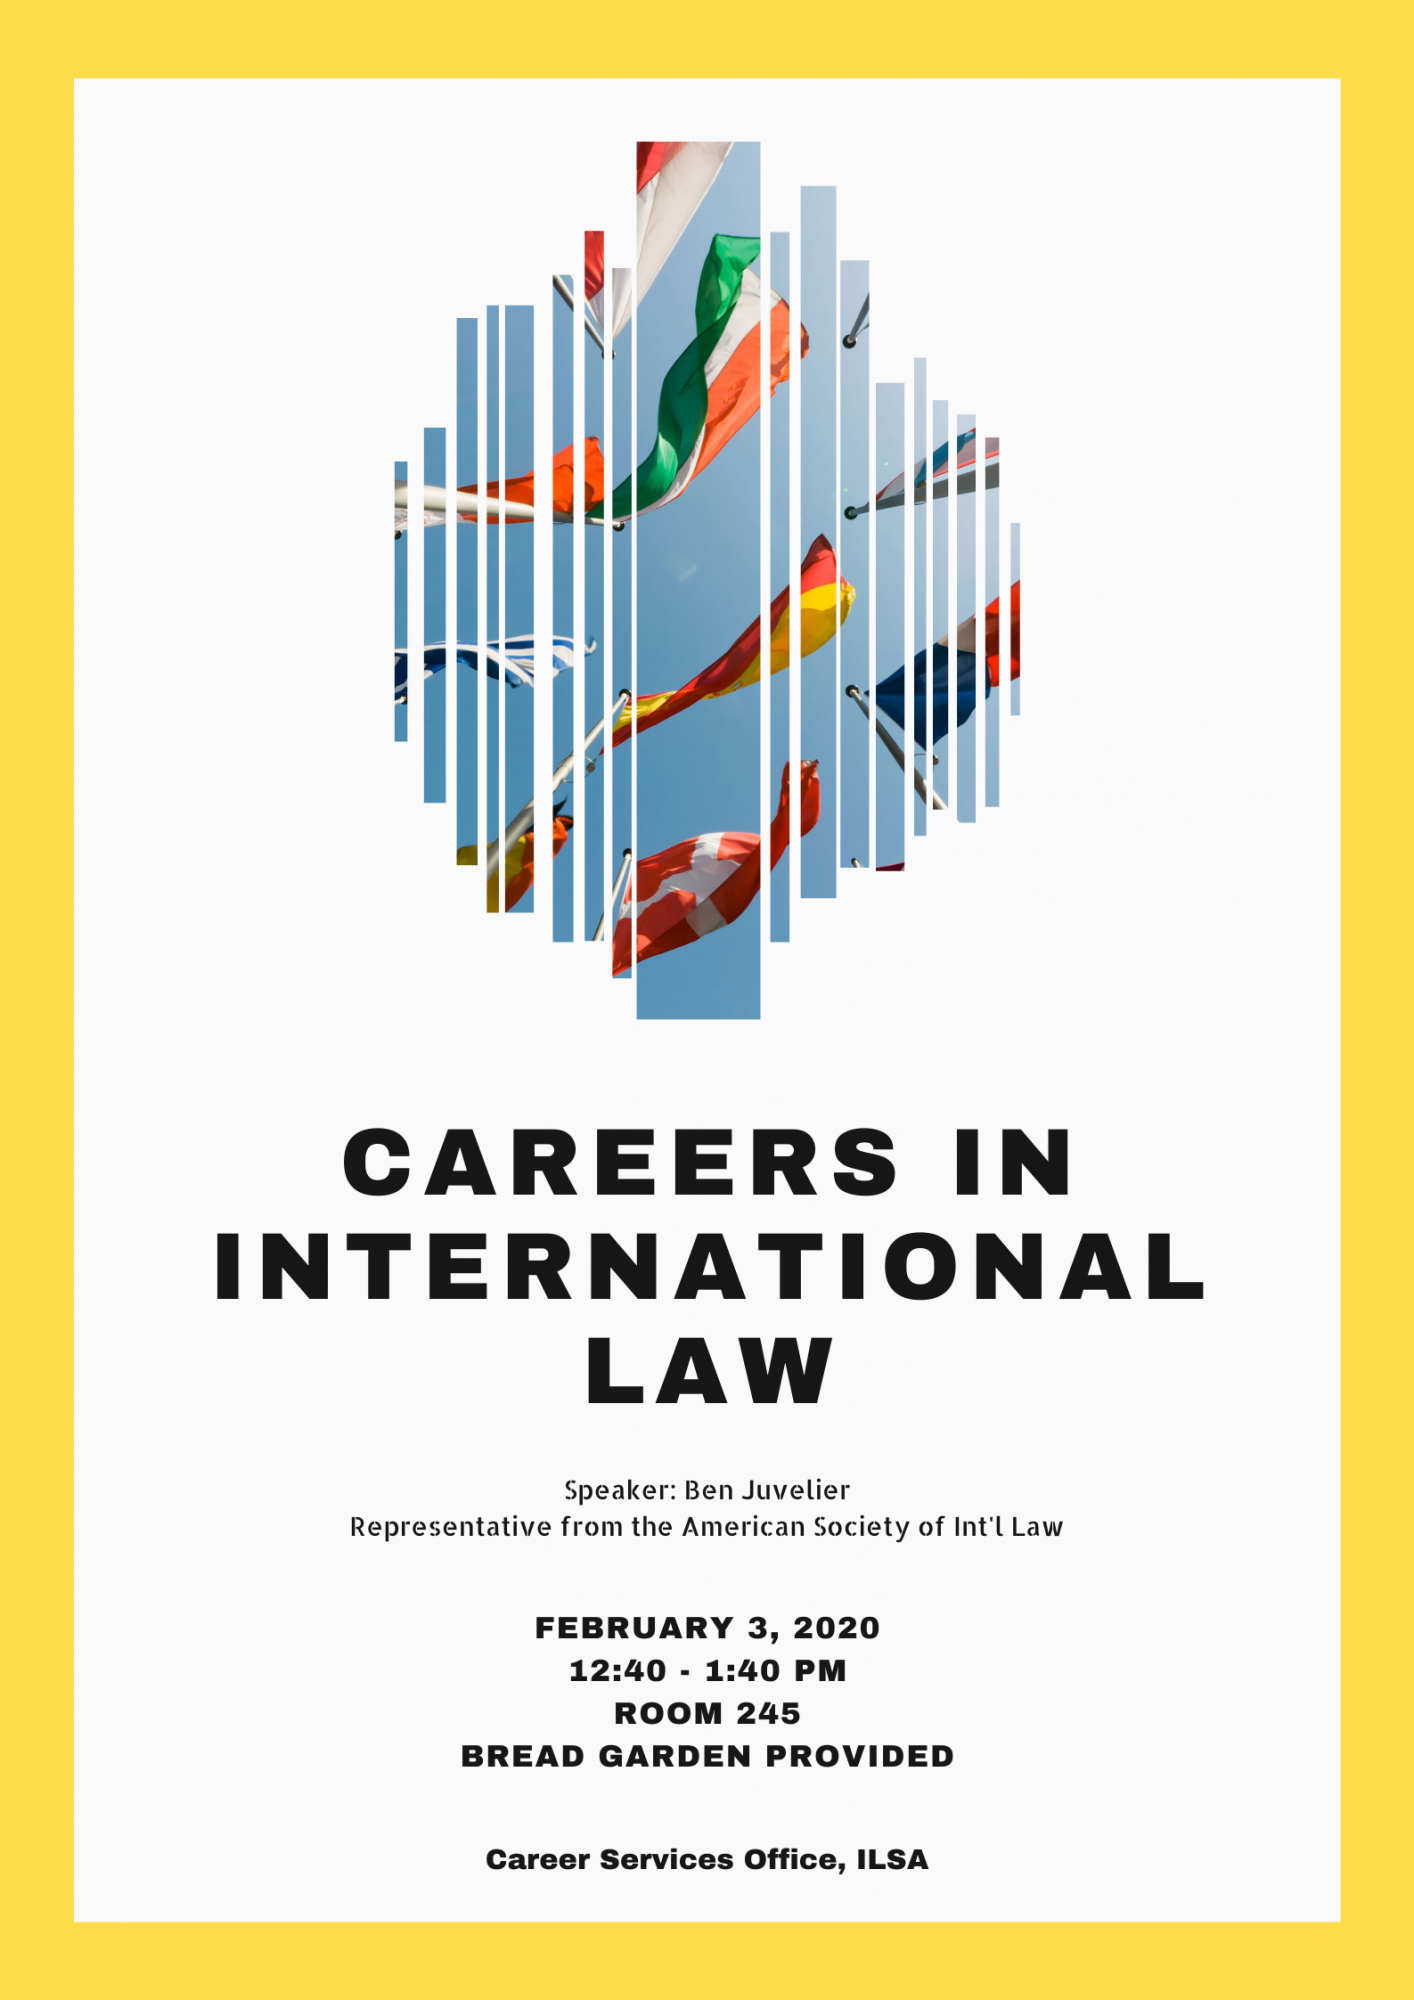 Careers in International Law. Speaker: Ben Juvelier, Representative from the American Society of International Law. February 3rd, 2020. 12:40-1:40 pm, Room 245, Bread Garden Provided. 